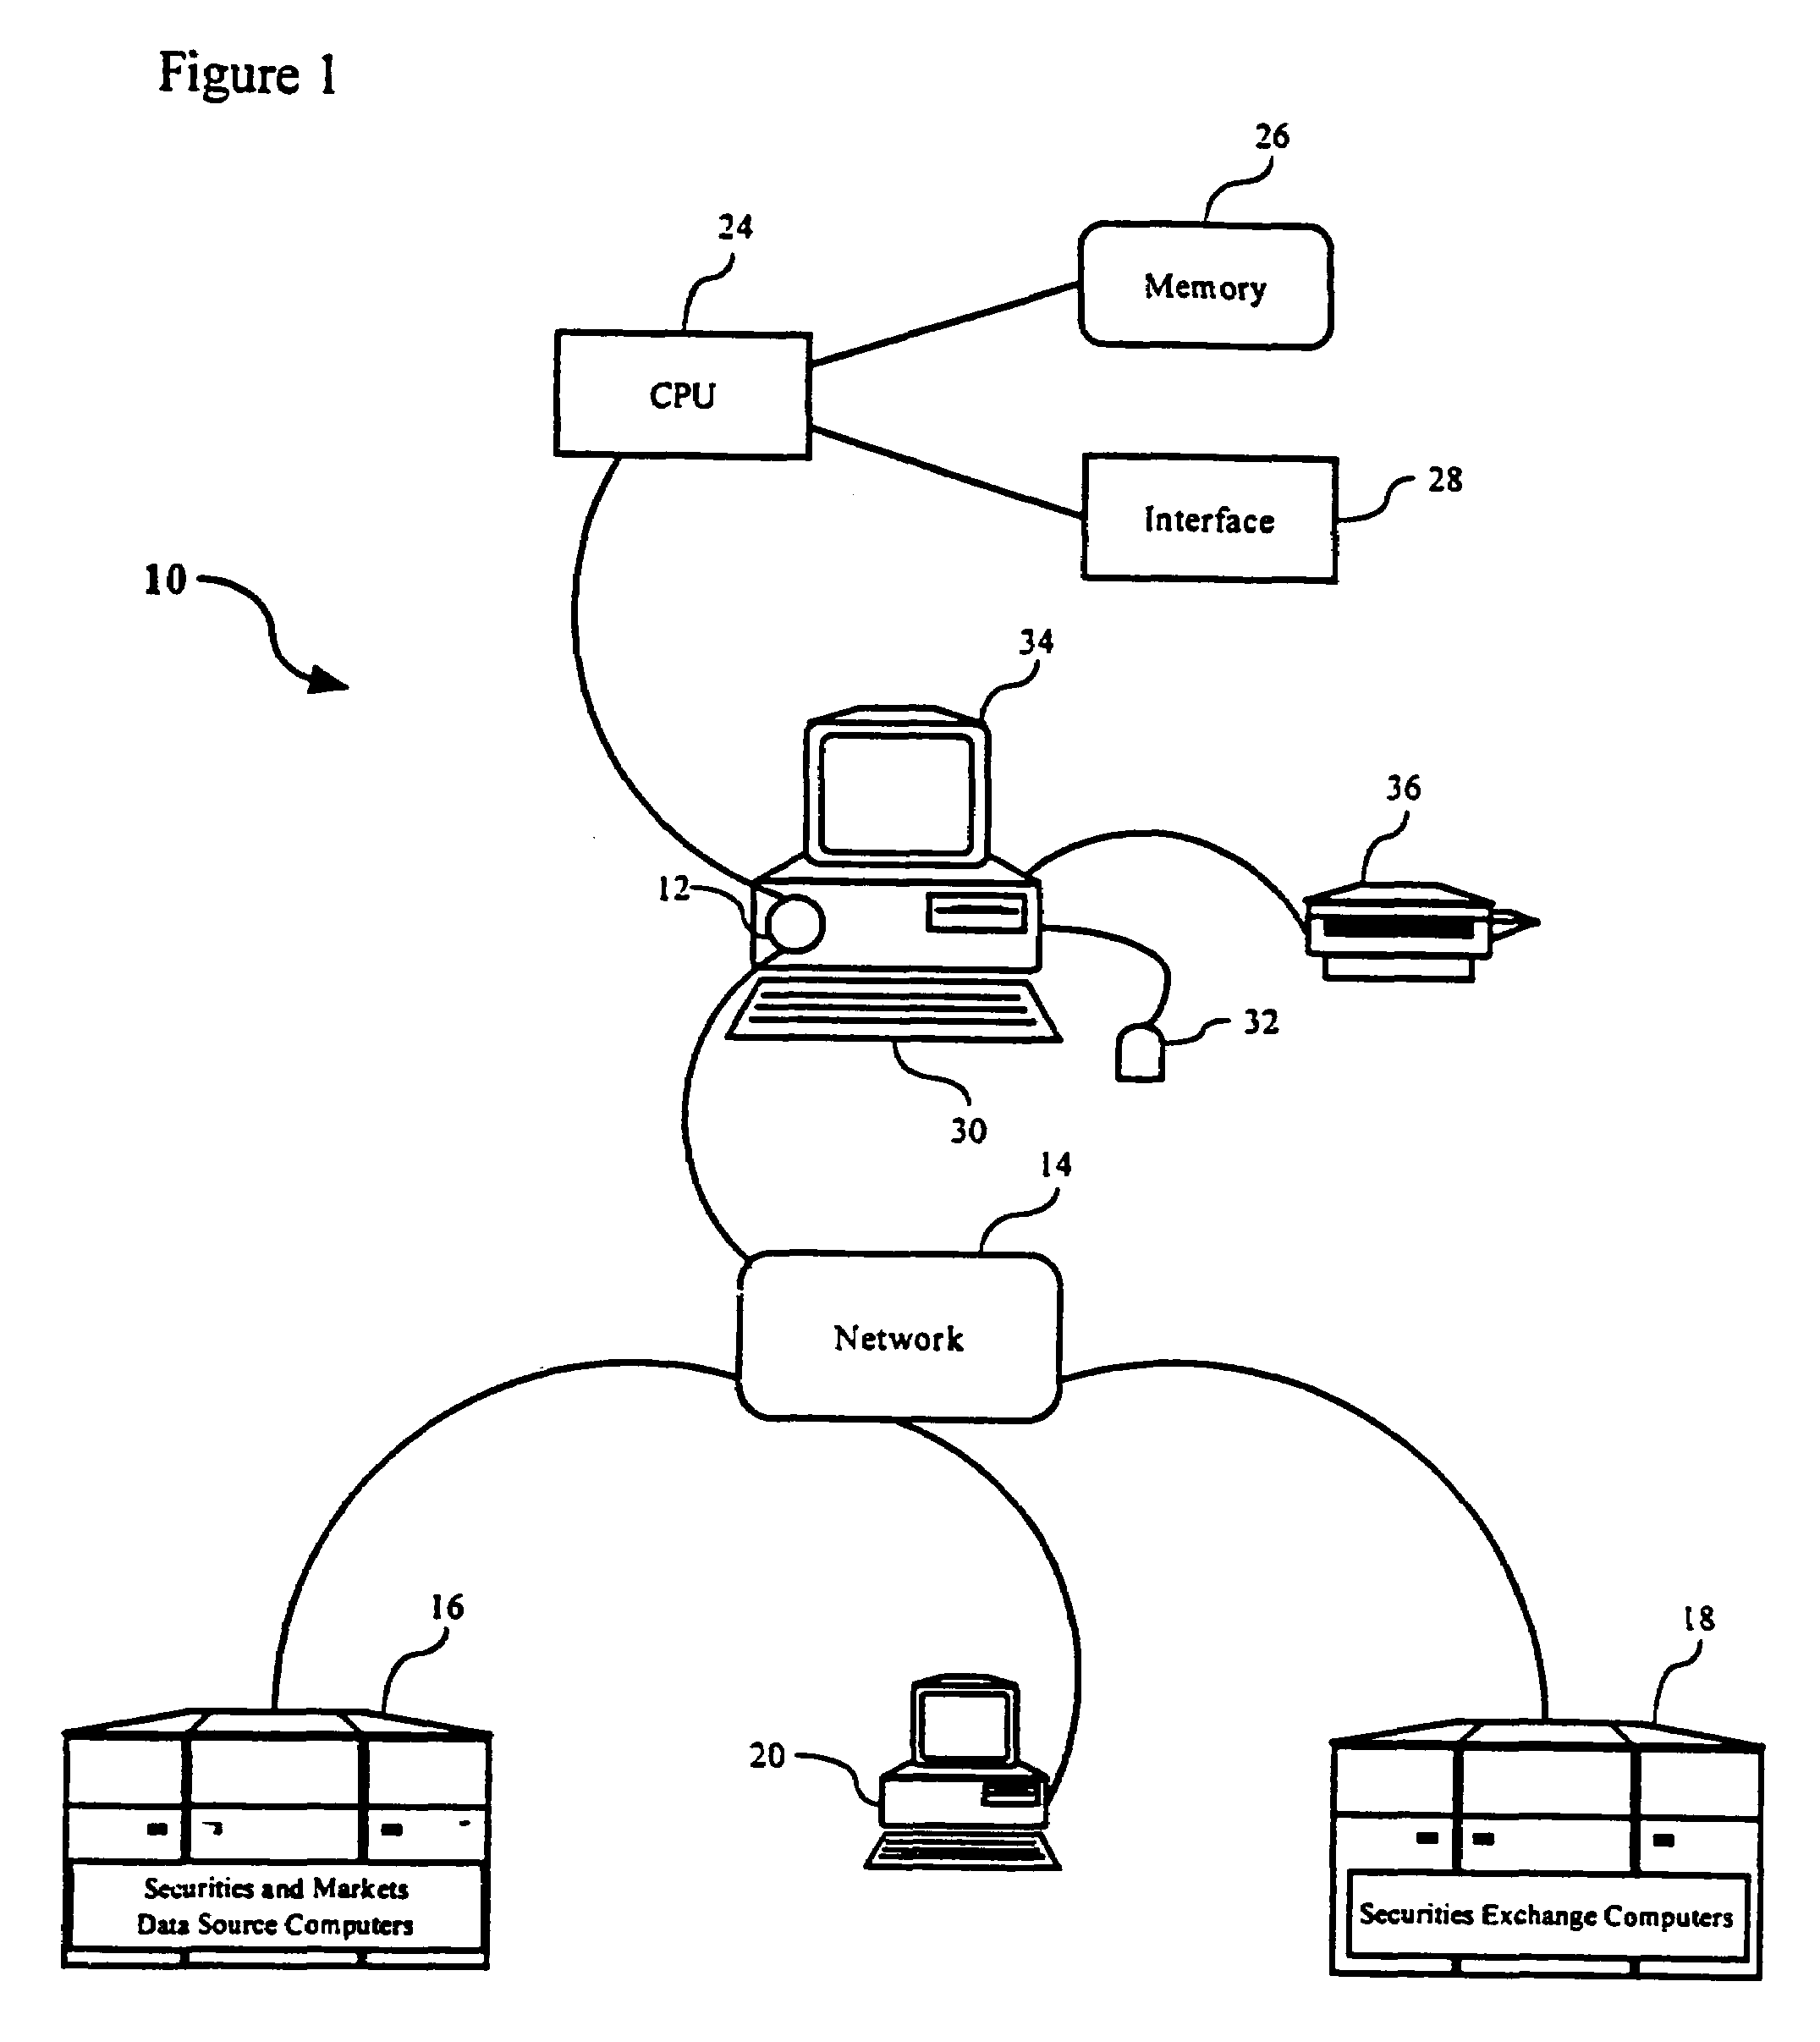 Method and apparatus for automated trading of equity securities using a real time data analysis